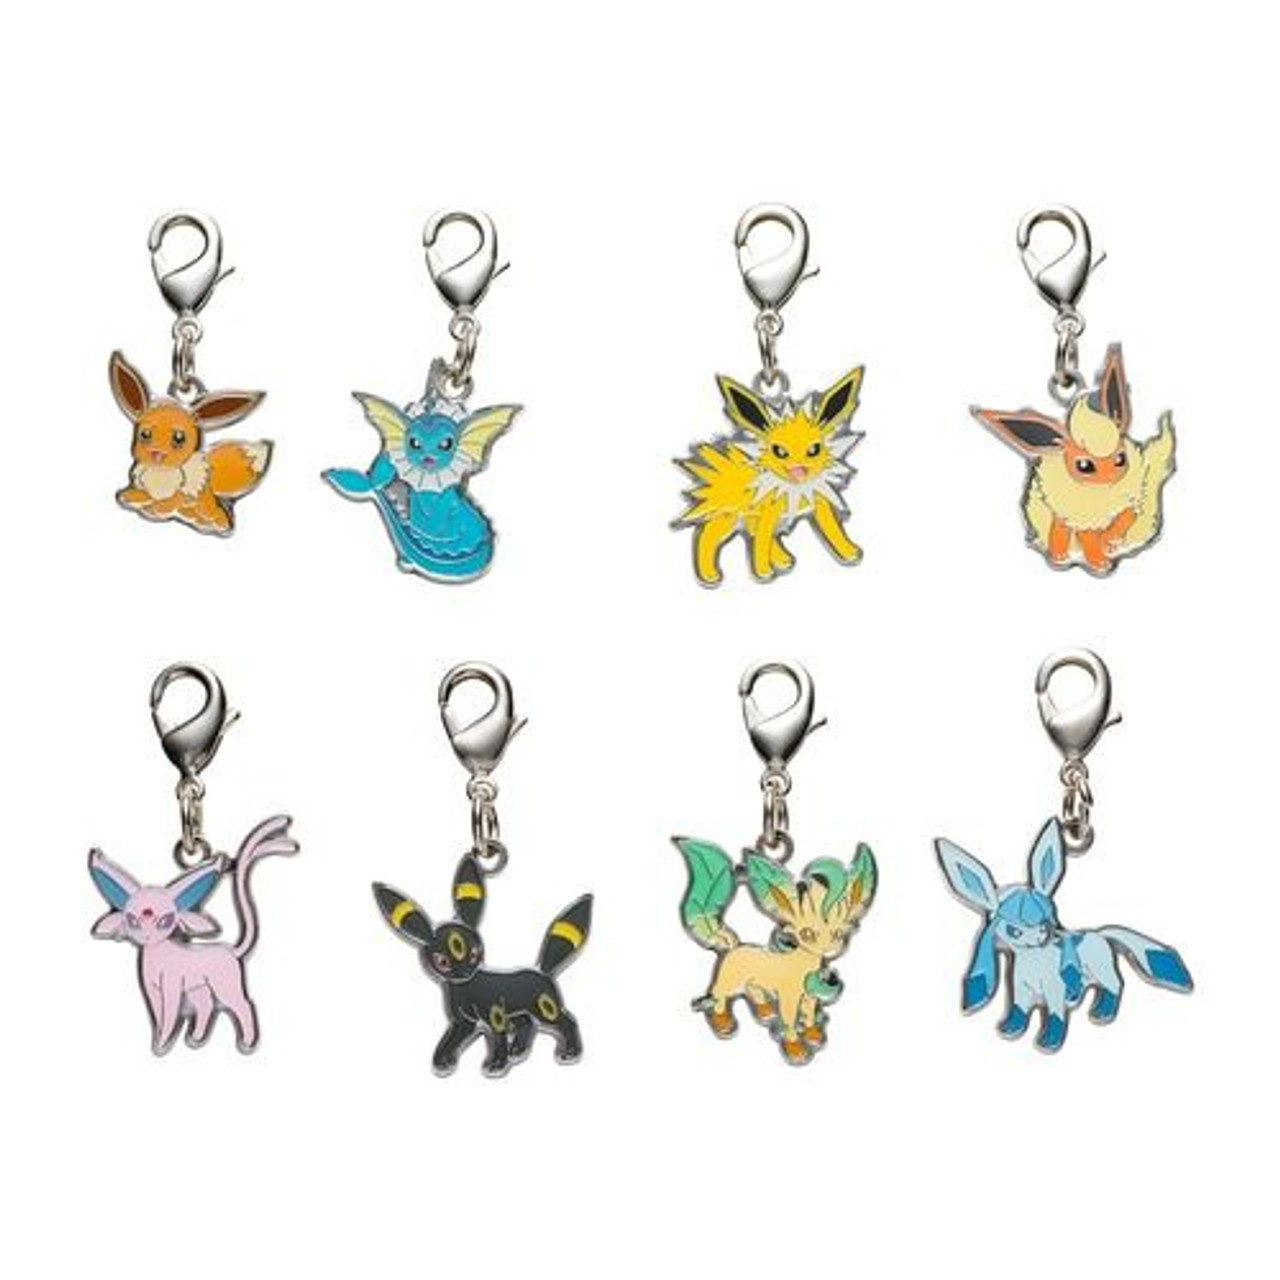 Japanese antique Pokemon XY 4 key chain popular character limited edition  ver.6